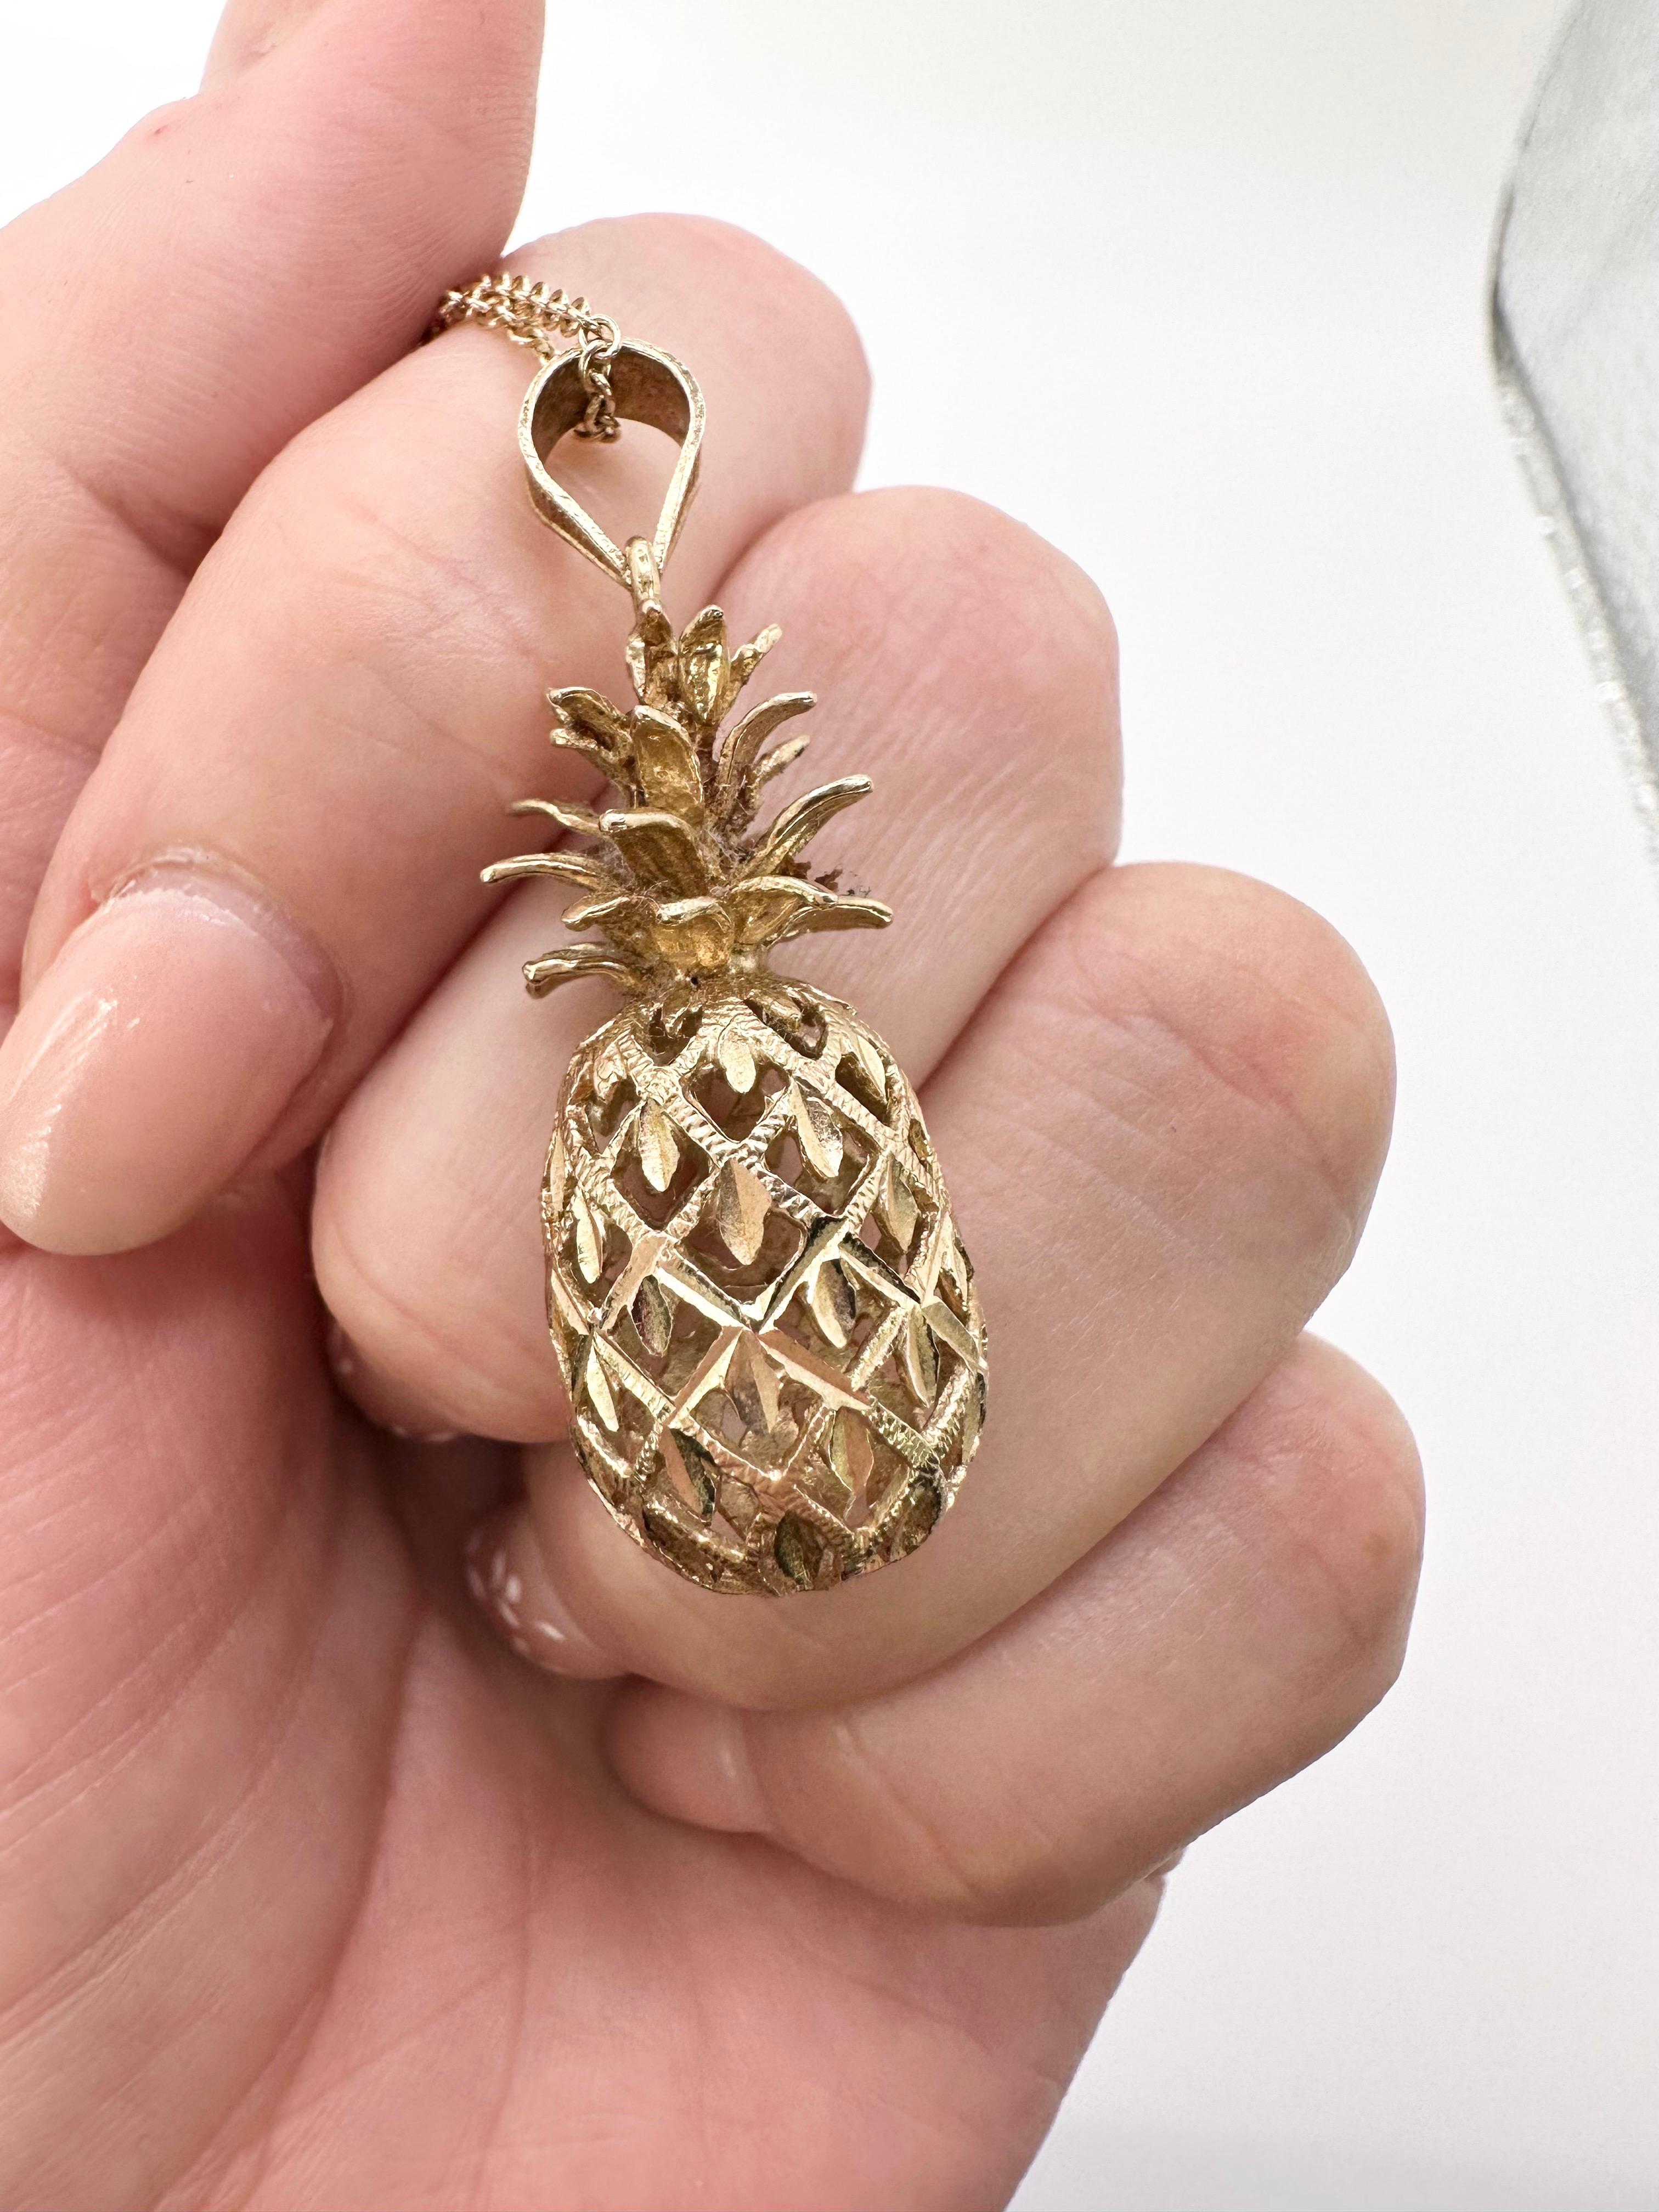 Pineapple pendant necklace in 14KT yellow gold, stunningly crafted with hand engraved details throughout.

GOLD: 14KT gold
Grams:5.56
size: 18 inches chain
Item#: 435-00041ATF

WHAT YOU GET AT STAMPAR JEWELERS:
Stampar Jewelers, located in the heart